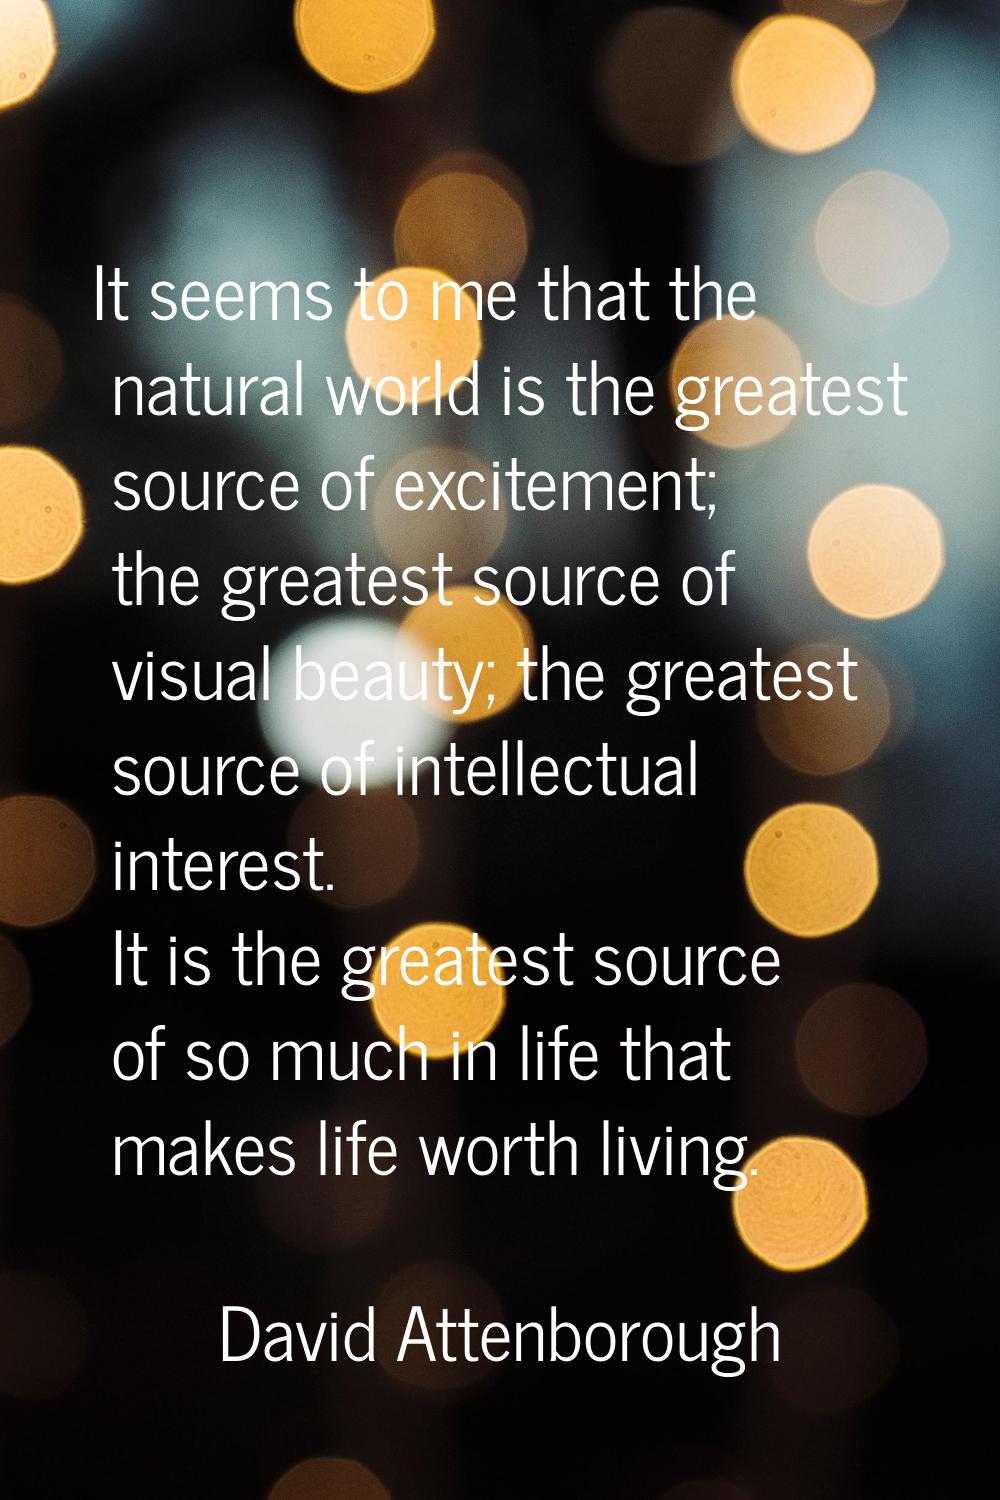 It seems to me that the natural world is the greatest source of excitement; the greatest source of 